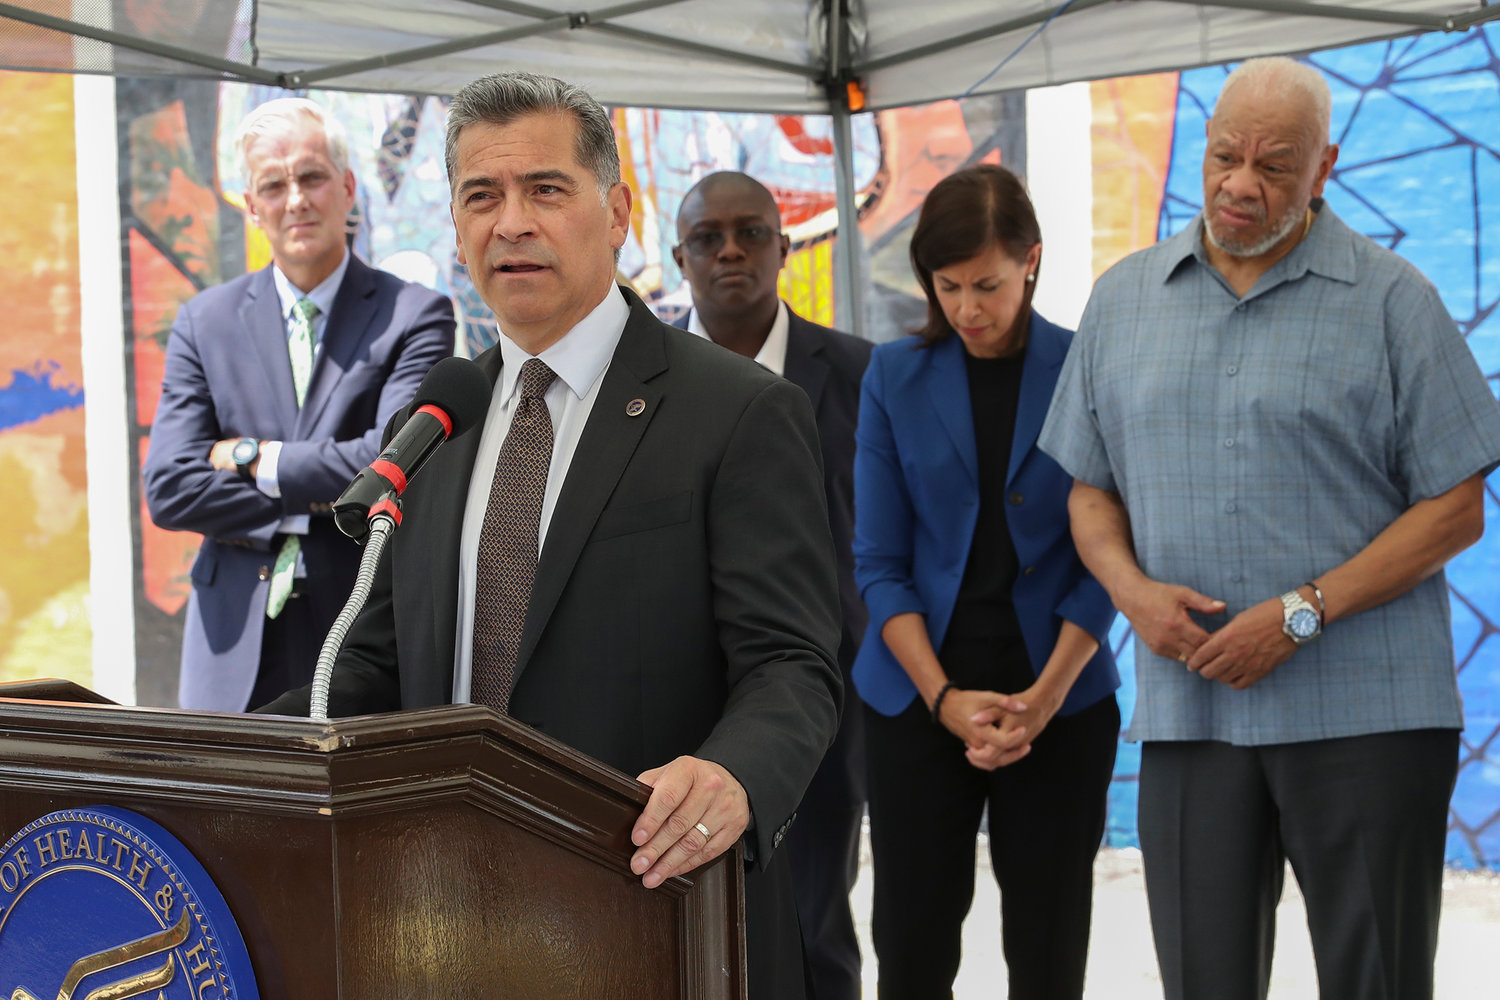 Xavier Becerra, Secretary of the Department of Health and Human Services, speaks at the podium during a press conference on the kickoff of 988, a new national mental health hotline, in West Philadelphia, July 15, 2022. The press conference took place in front of the Contemplation, Clarity and Resilience mural by artist Eric Okdeh, which is a mural that represents, among many other things, the process of overcoming hardships.